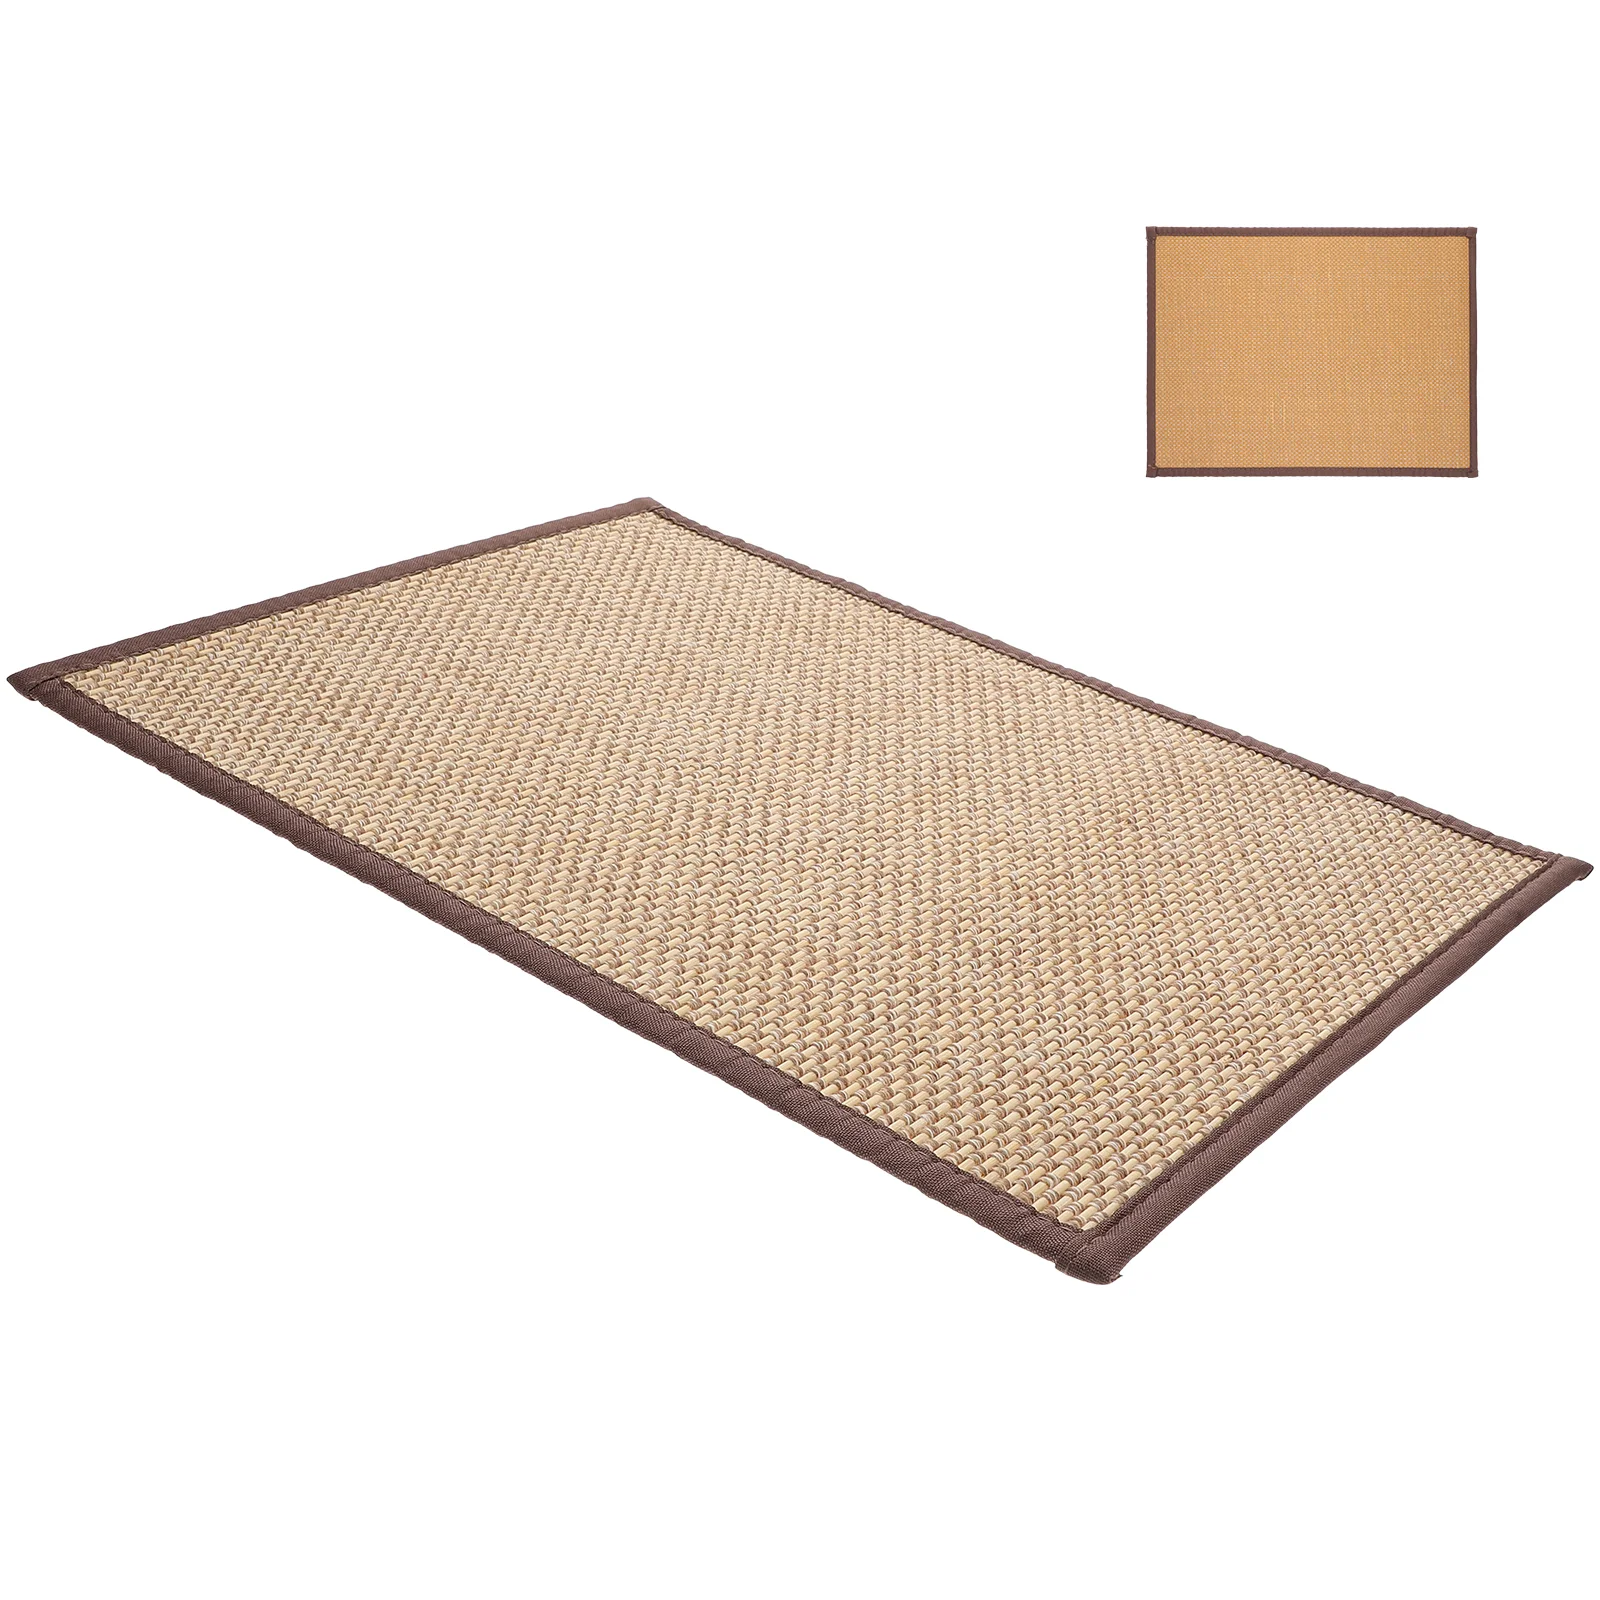 Seating Small Spaces Woven Cushion Home Yoga Rug Bamboo Rug Woven Sitting Mat Sponge Floor Pillows Adults Child Mattress Camping